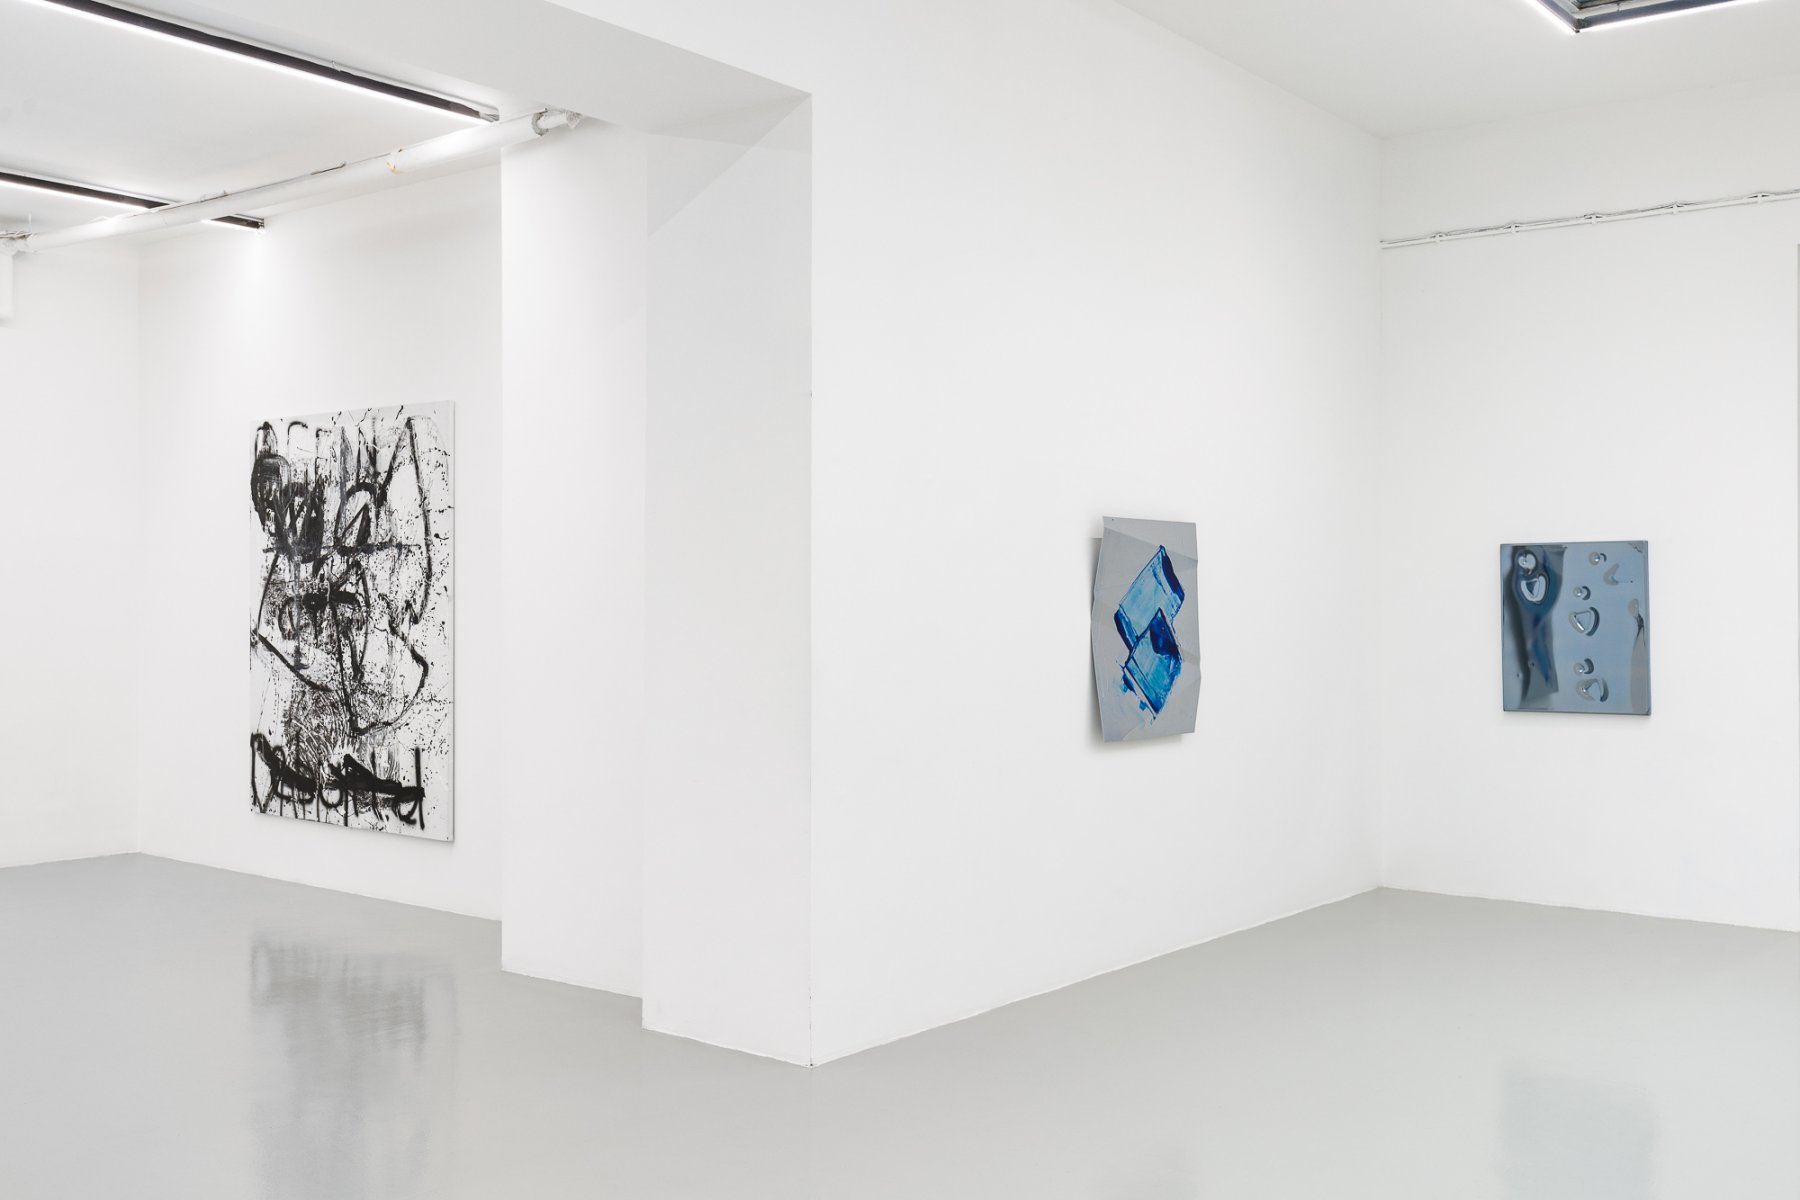 Installation image for Richie Culver & Hannah Perry: Body Shop, at Galerie Lisa Kandlhofer